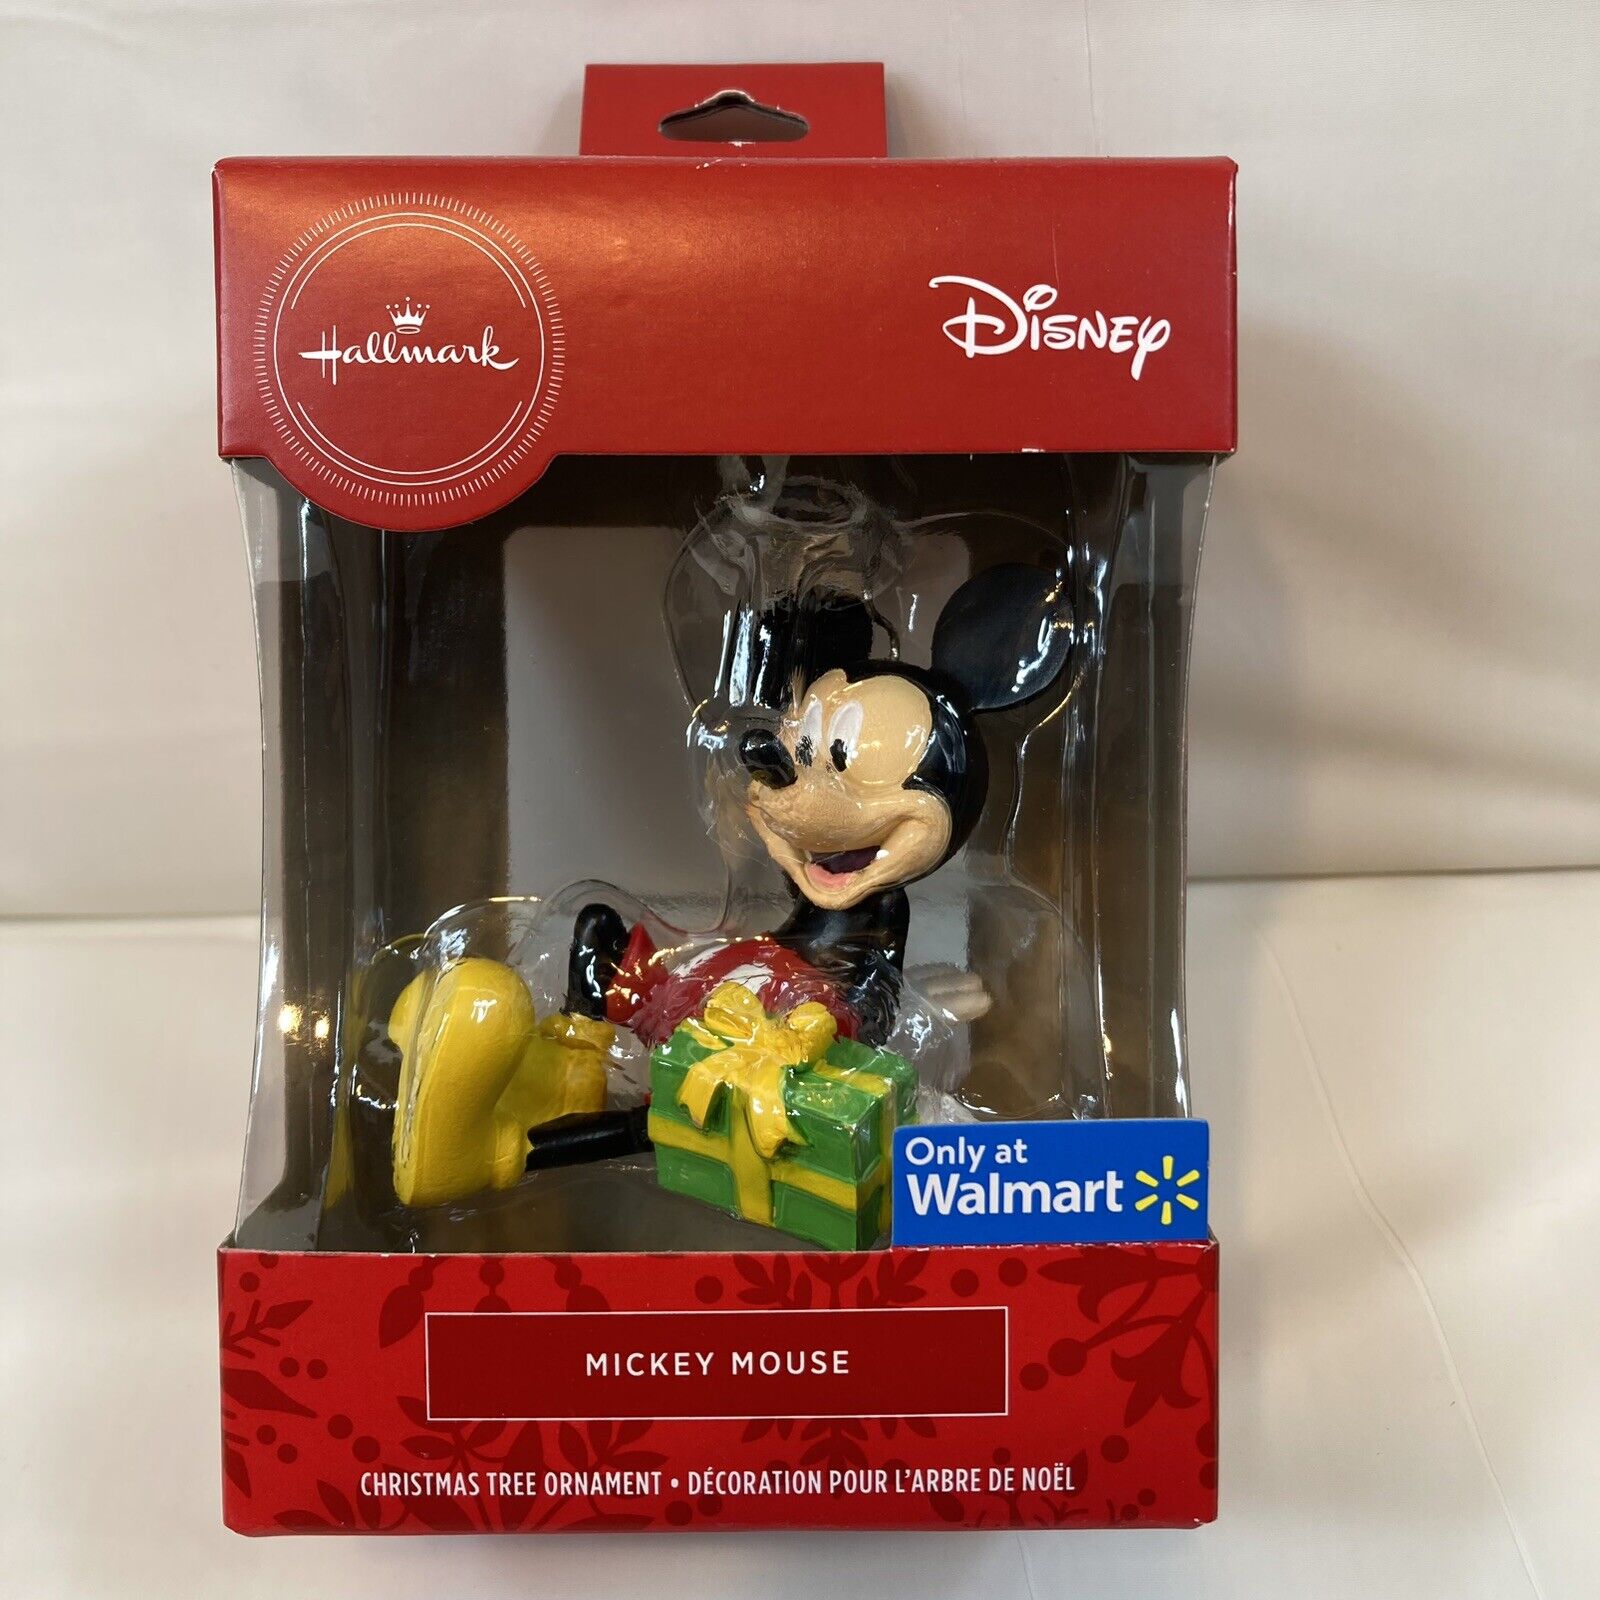 2020 Hallmark Red Box Mickey Mouse Christmas Tree Ornament Sitting With a Gift